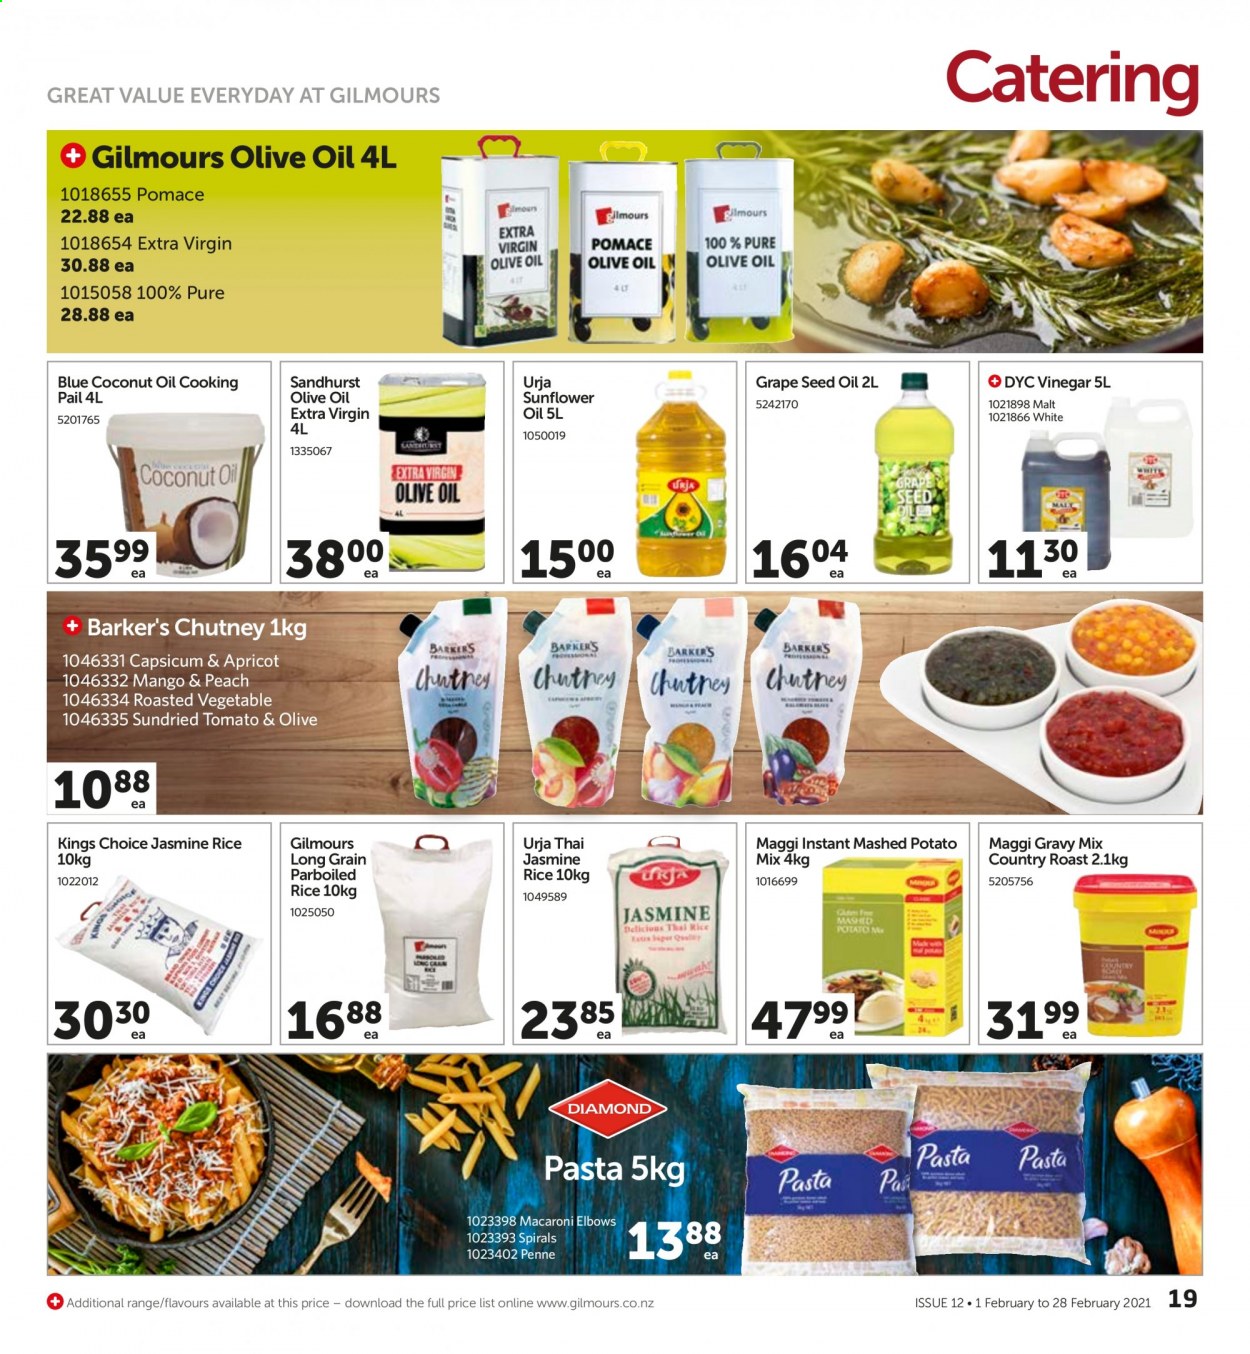 thumbnail - Gilmours mailer - 01.02.2021 - 28.02.2021 - Sales products - capsicum, mango, Maggi, malt, rice, jasmine rice, macaroni, pasta, parboiled rice, penne, gravy mix, chutney, coconut oil, extra virgin olive oil, sunflower oil, vinegar, olive oil, grape seed oil, dried tomatoes. Page 19.